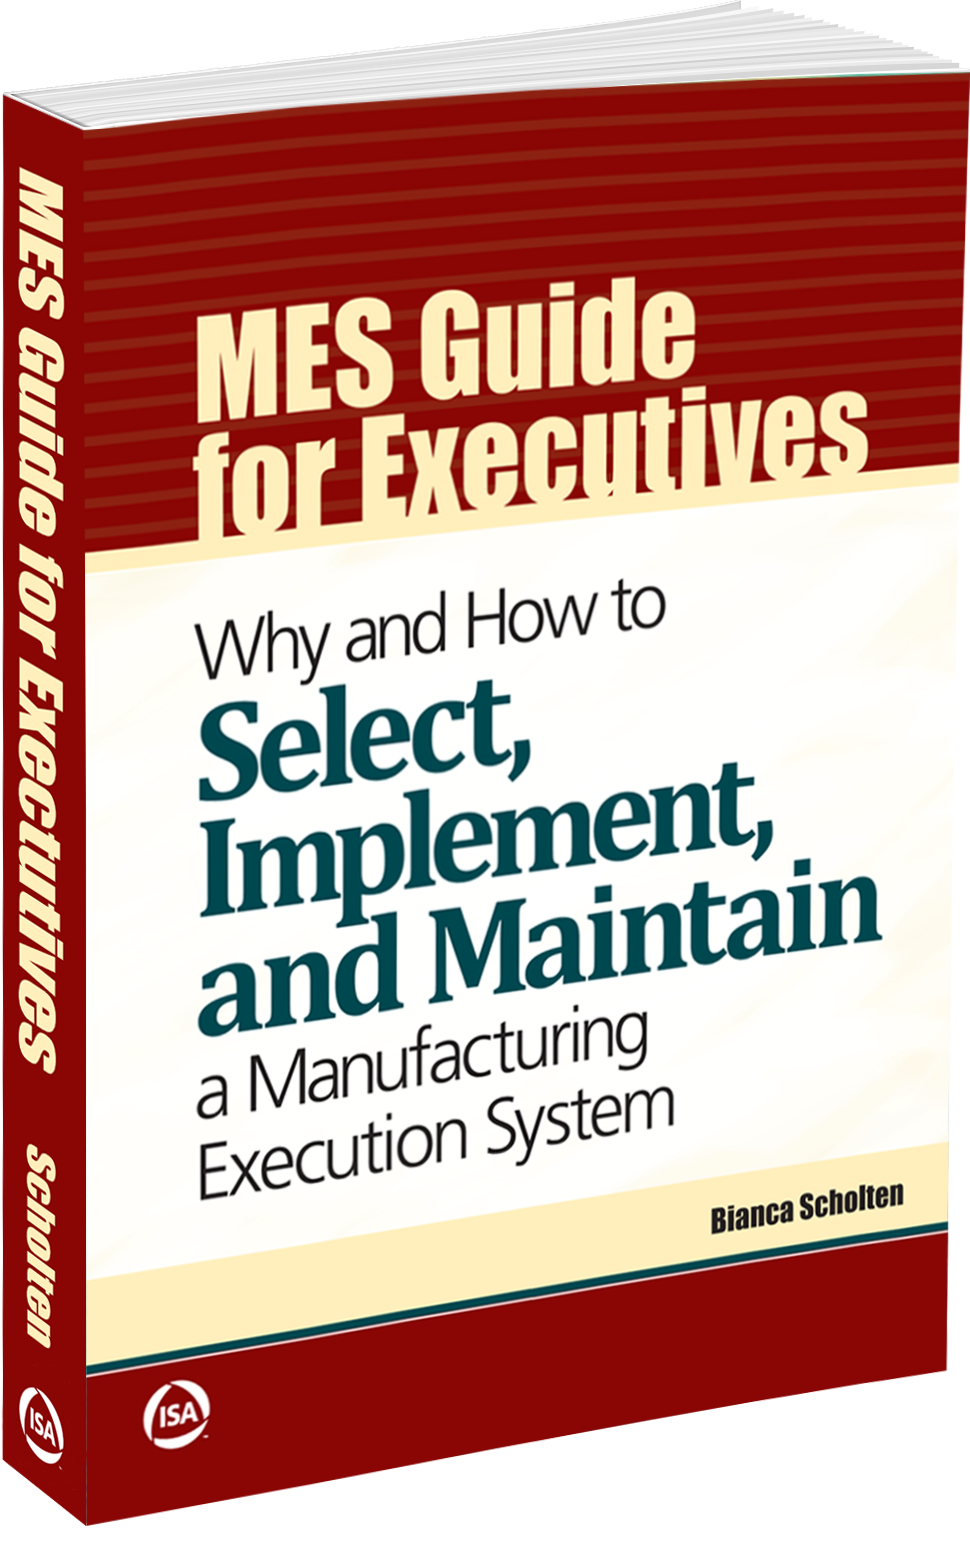 MES_Guide_for_Executives-3D